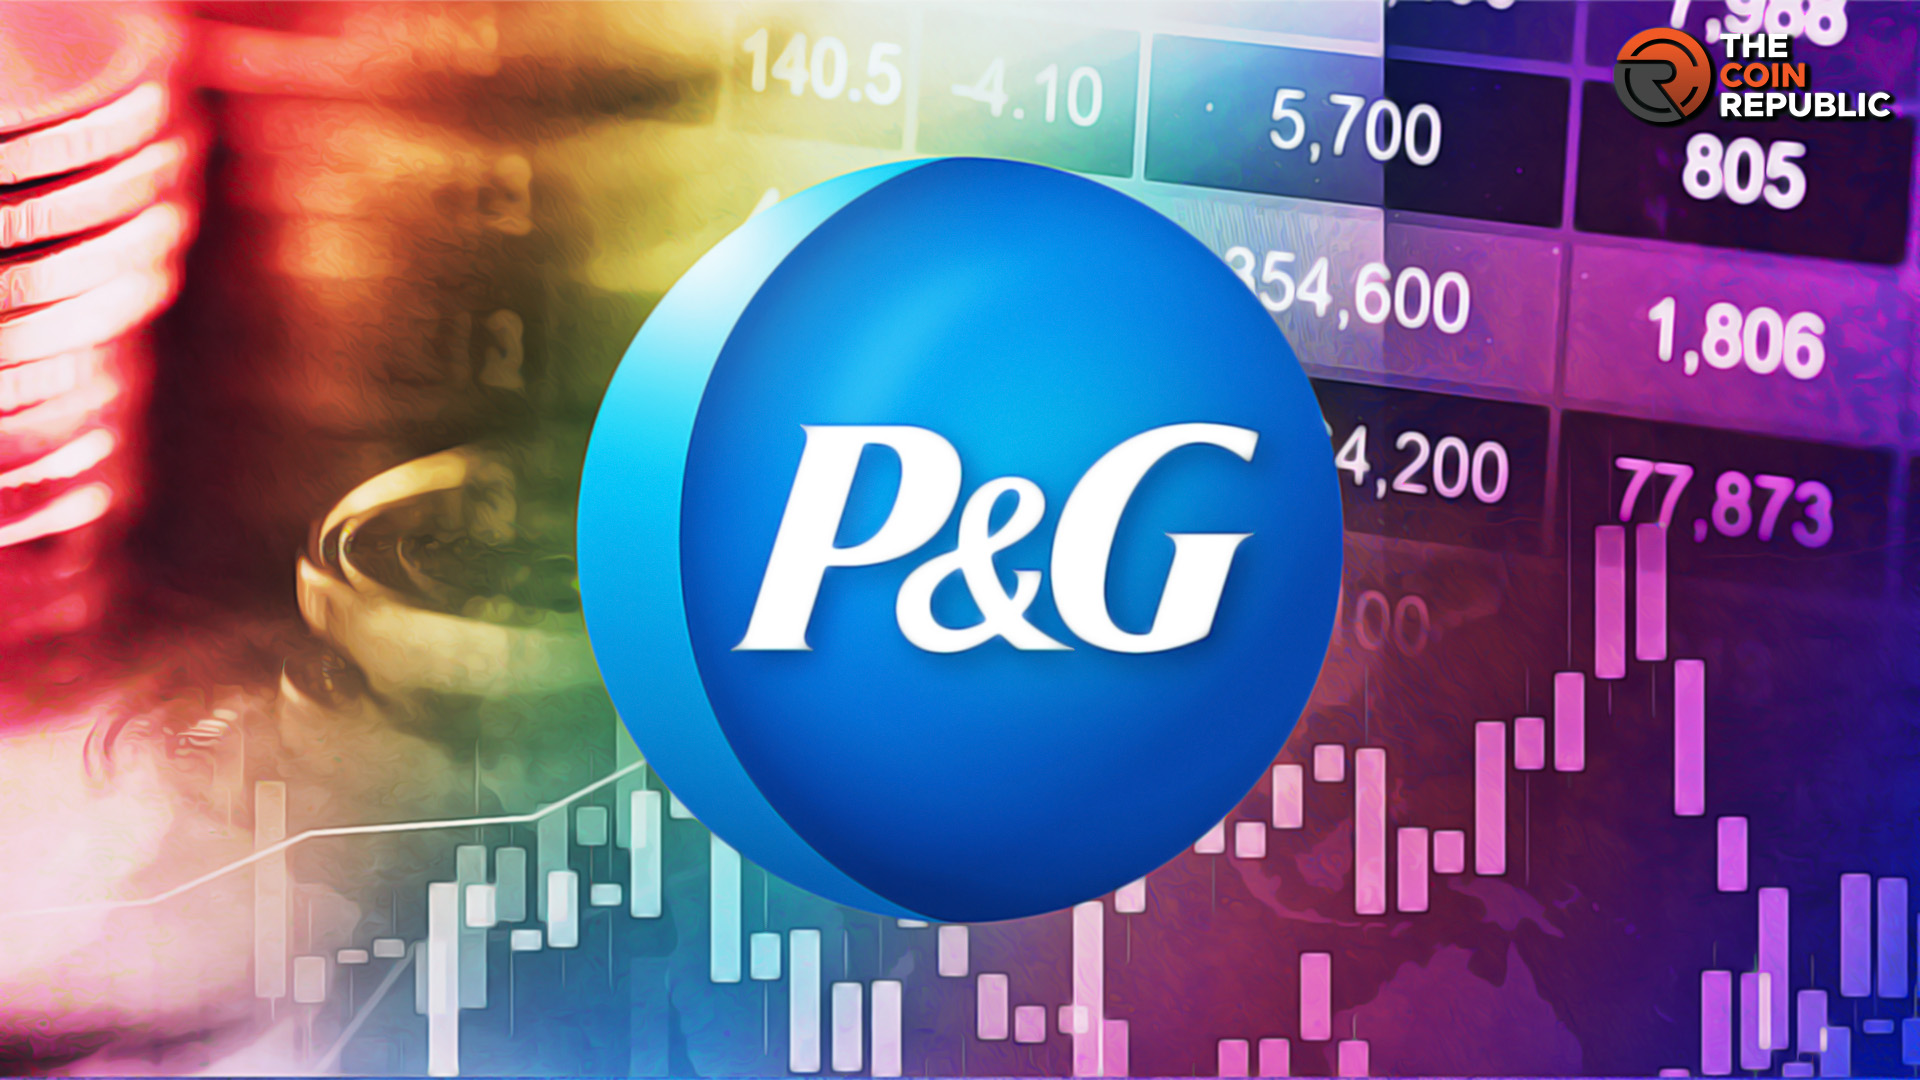 Procter & Gamble stock - A giant with rising dividends and 100 percent  stock price gains